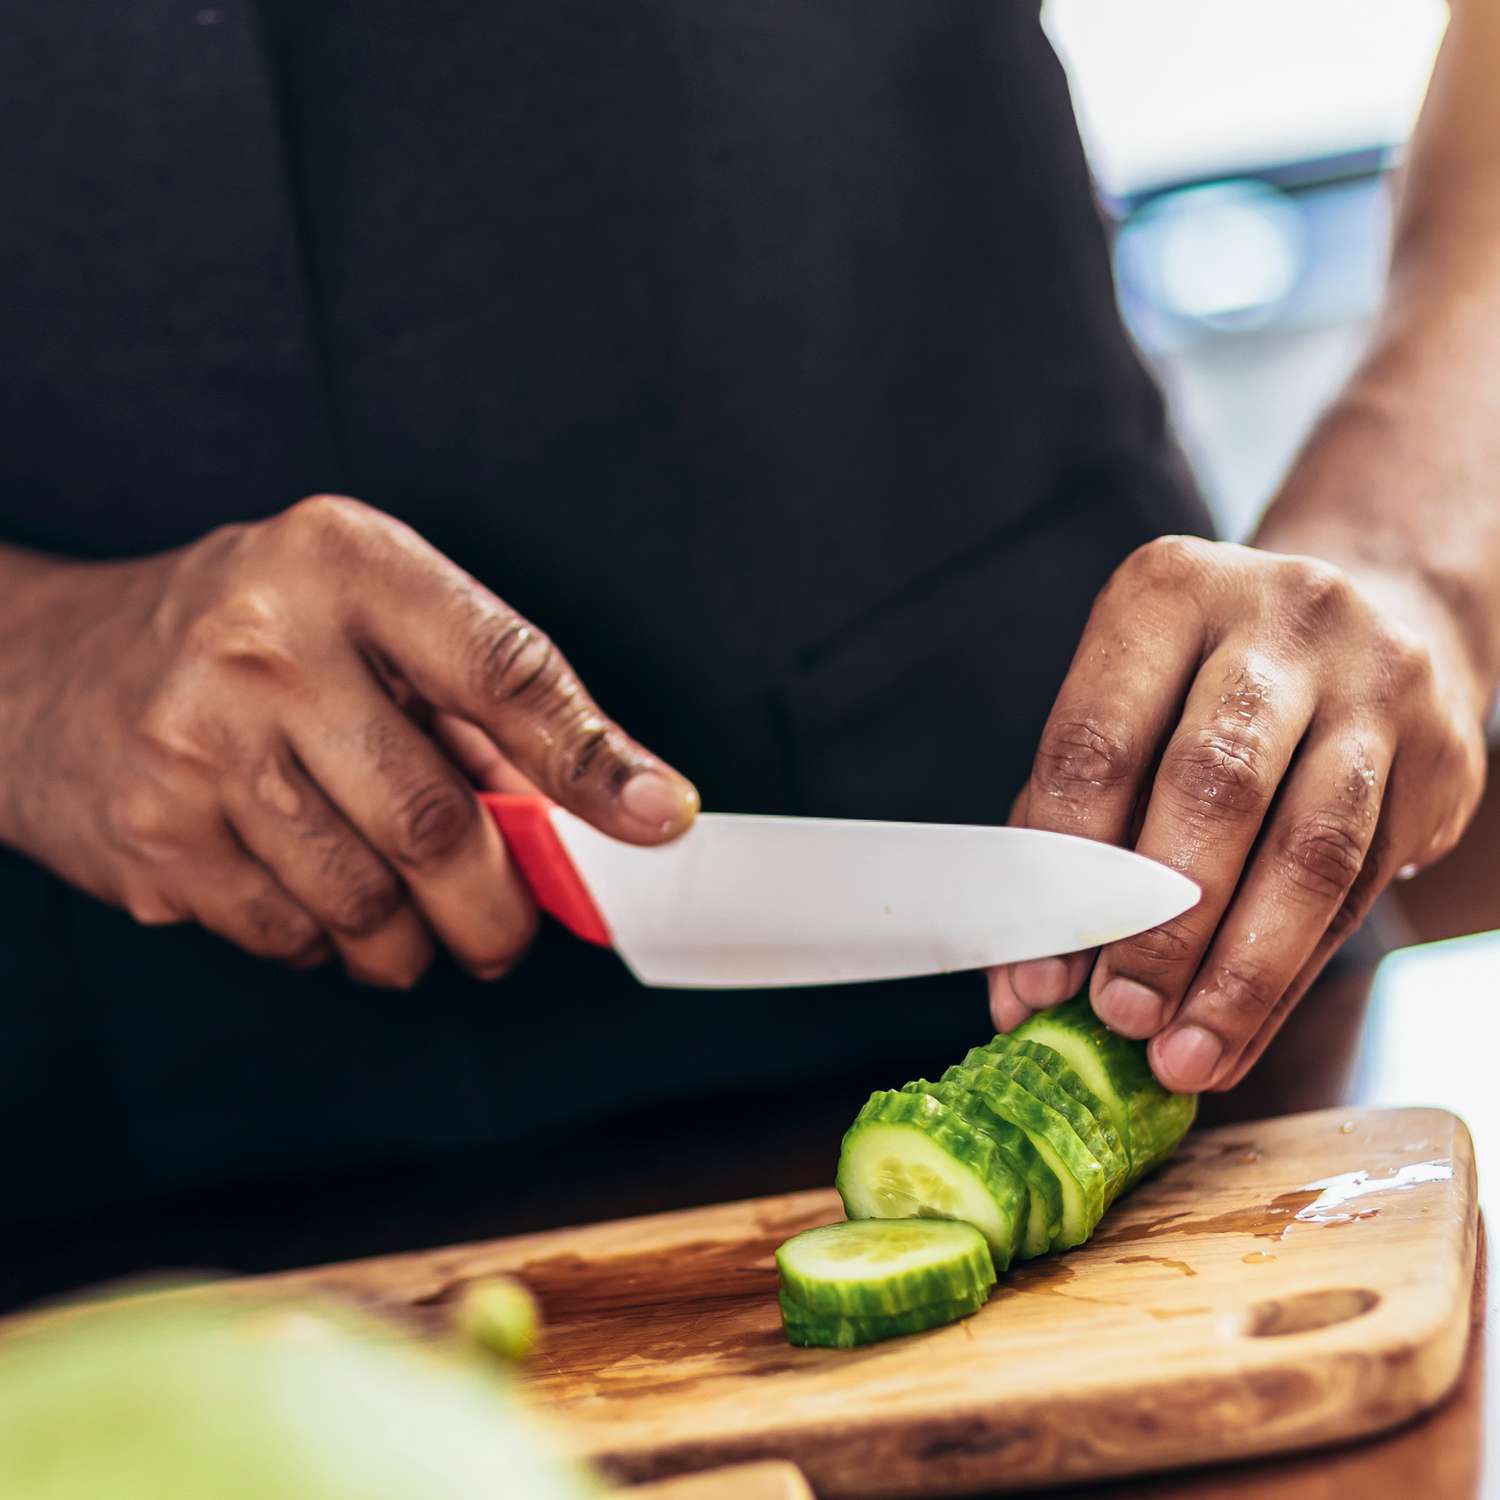 The Knife-Holding Mistakes You're Making and How to Fix Them